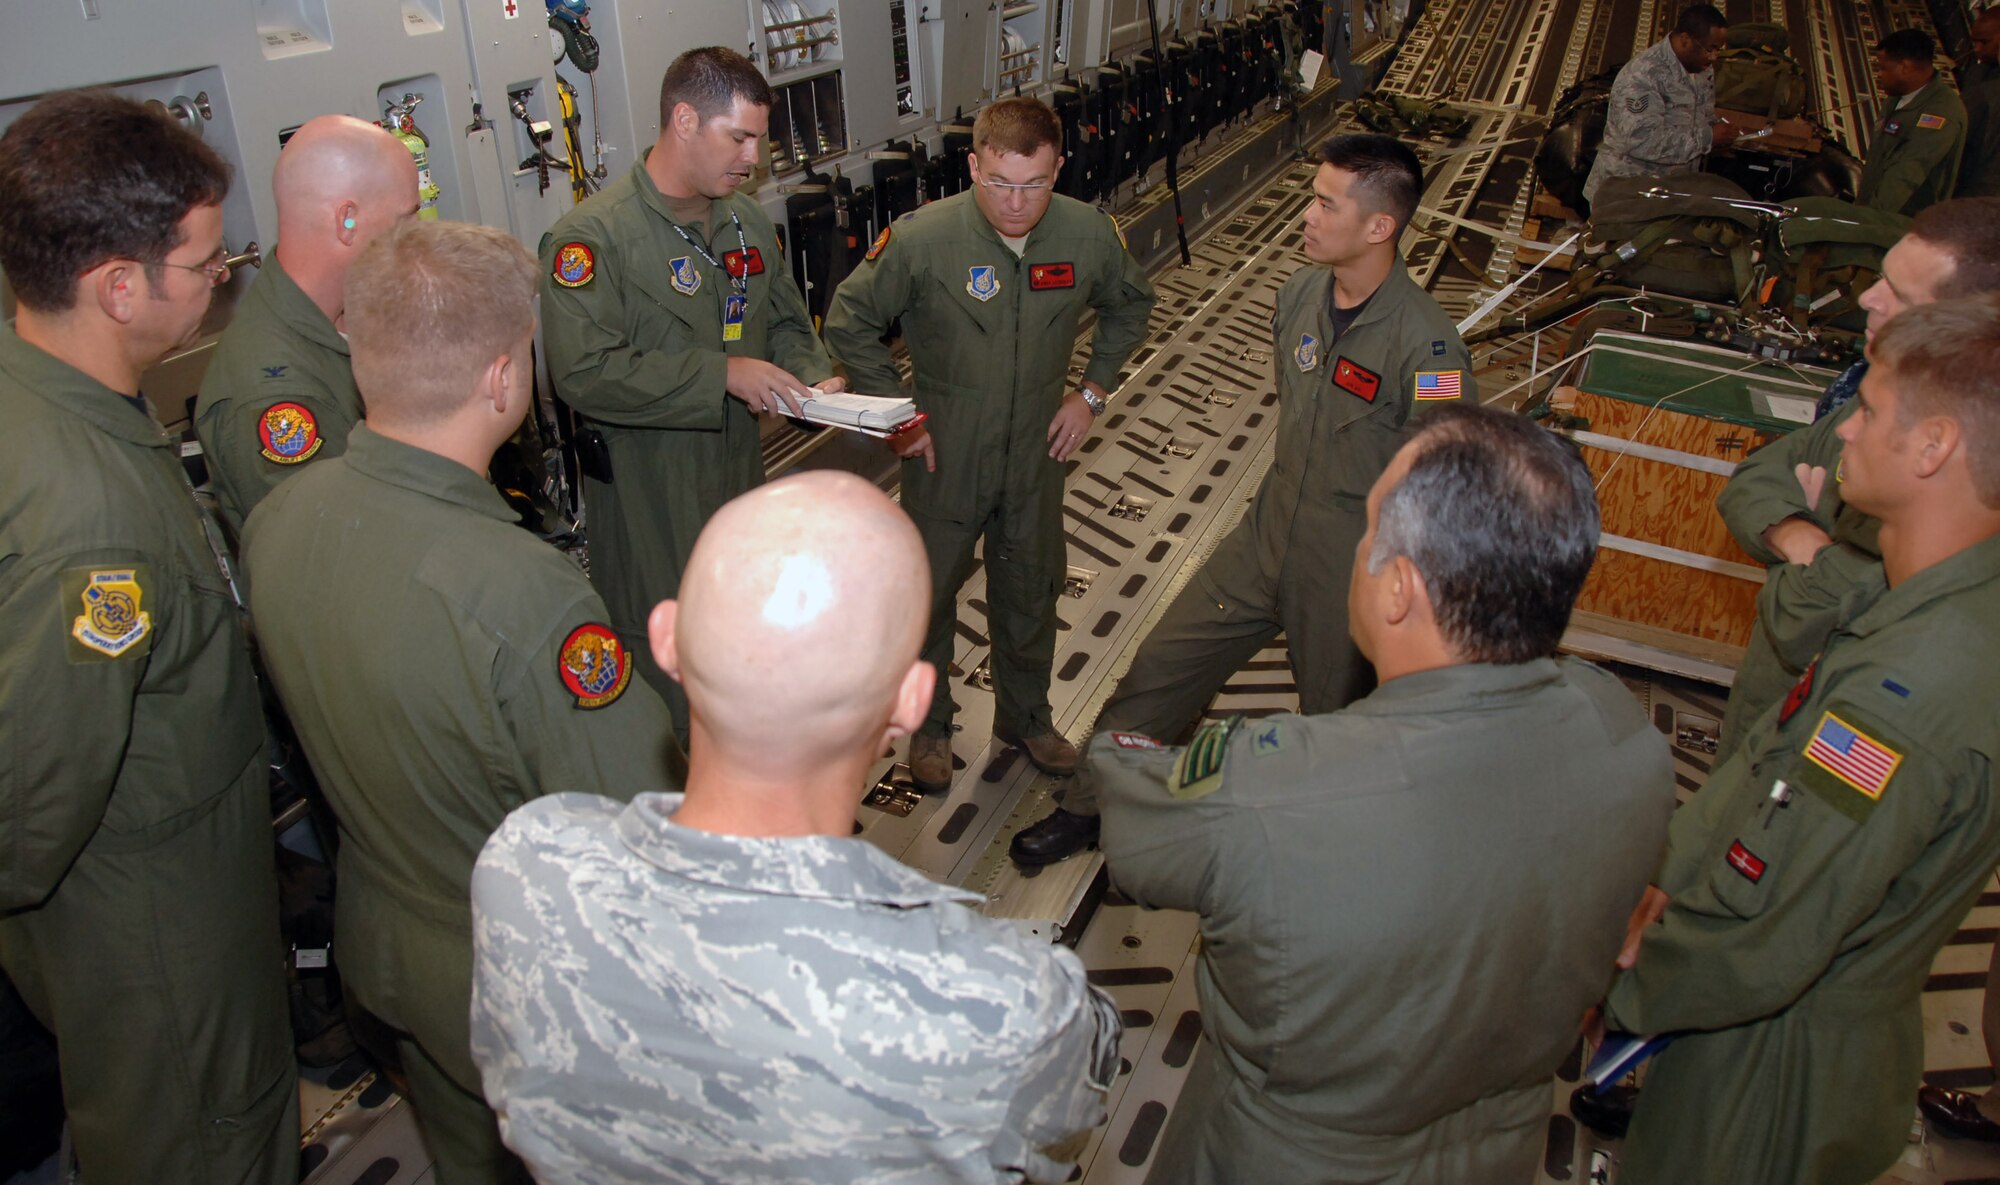 Aircrew members and passengers of the orientation flight talk before taking off May 24 at Joint Base Pearl Harbor Hickam, Hi. The orientation flight was an opportunity for Air Force, Navy, and Air National Guard leaders to get a better understanding of each other's needs and capabilities. (U.S. Air Force photo by Senior Airman Nathan Allen)